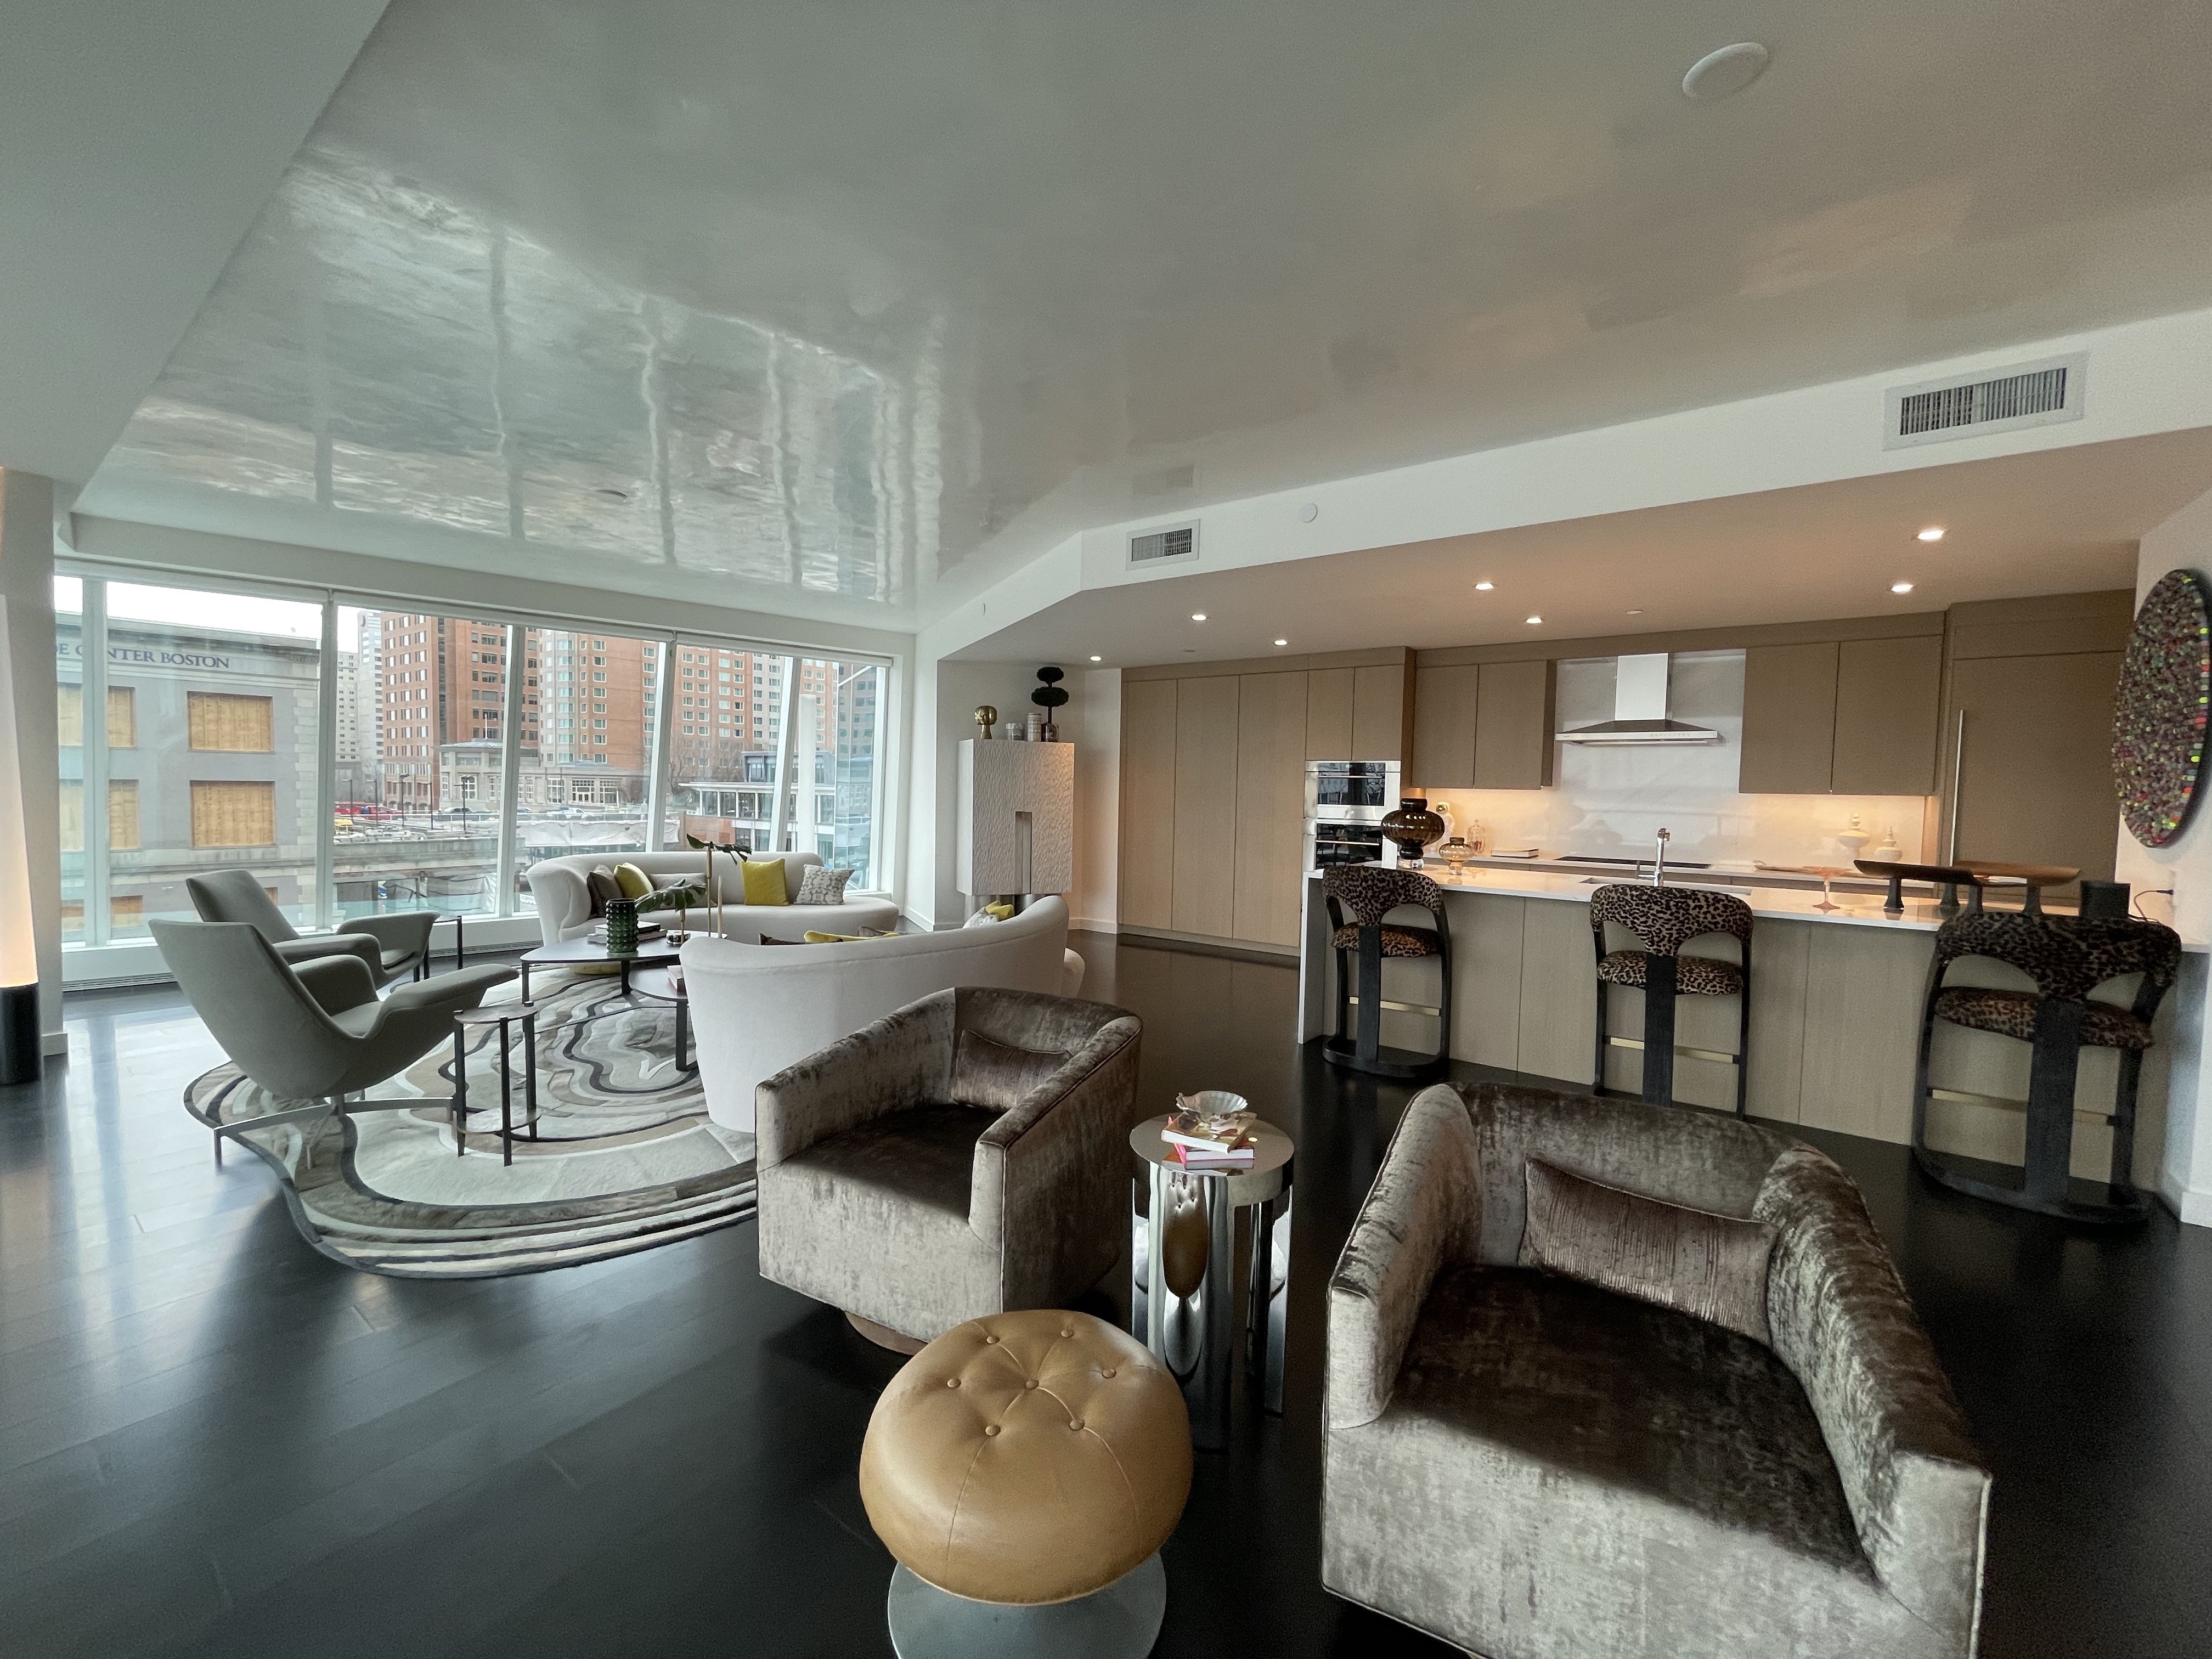 A living room and kitchen area inside a 3 bed, 3.5 bath condo at the St. Regis residences.